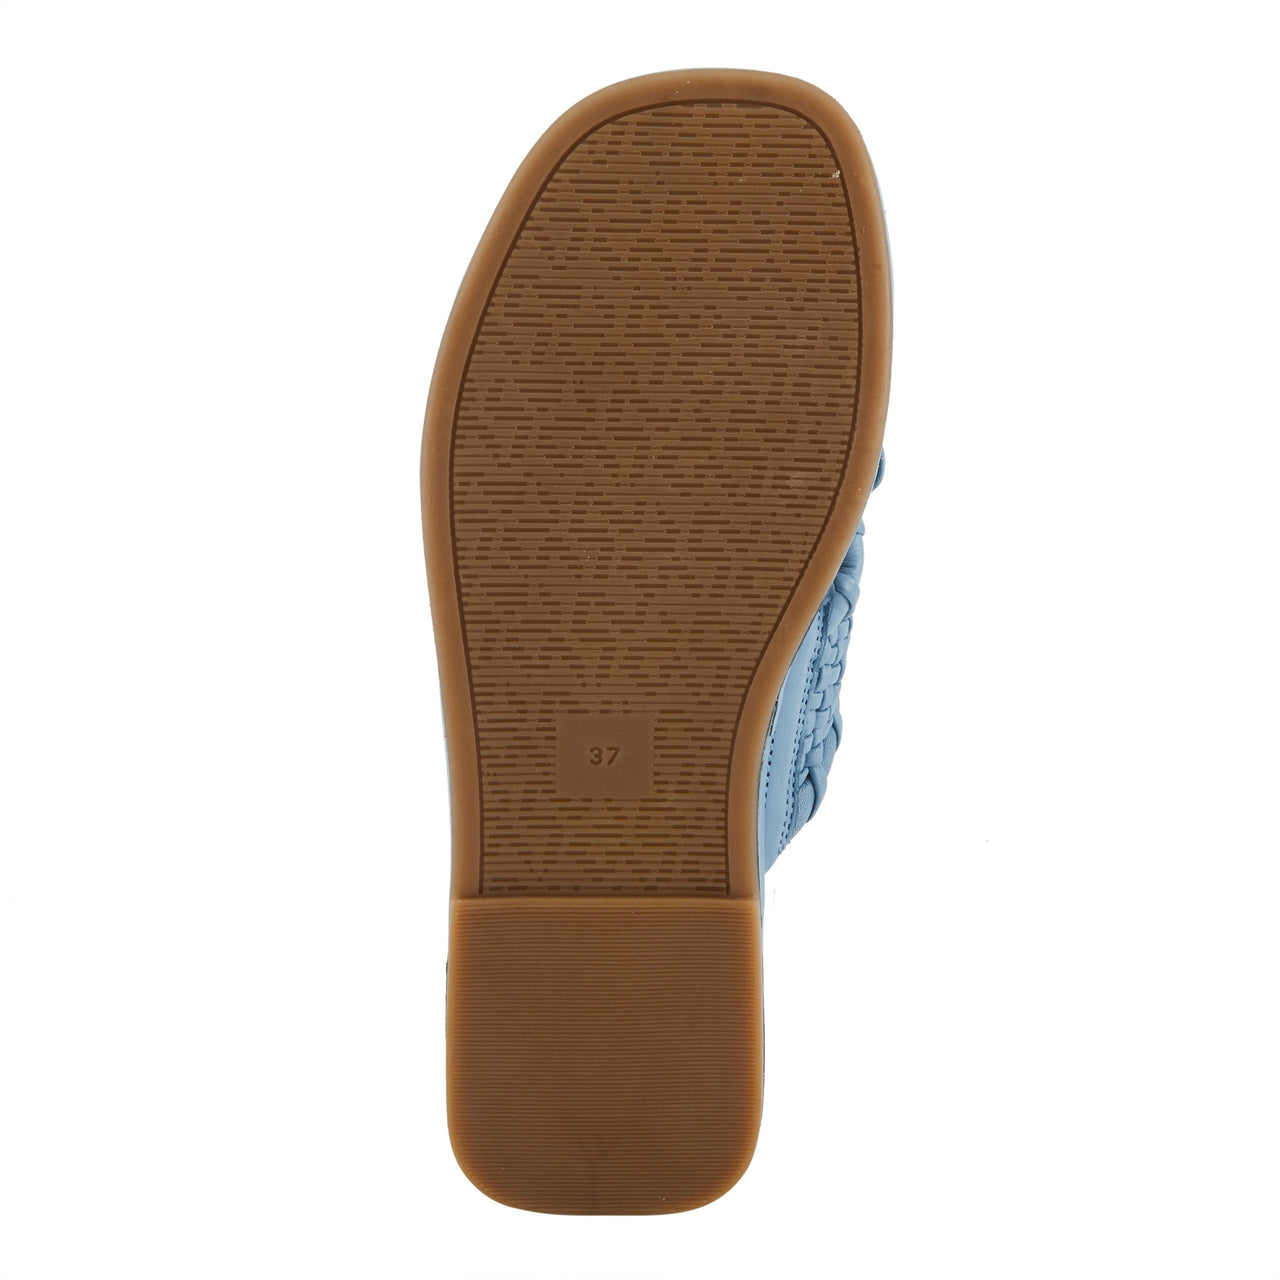 Women's Spring Step Montauk Sandals in tan leather with embellished straps and cushioned insoles for all-day comfort and style